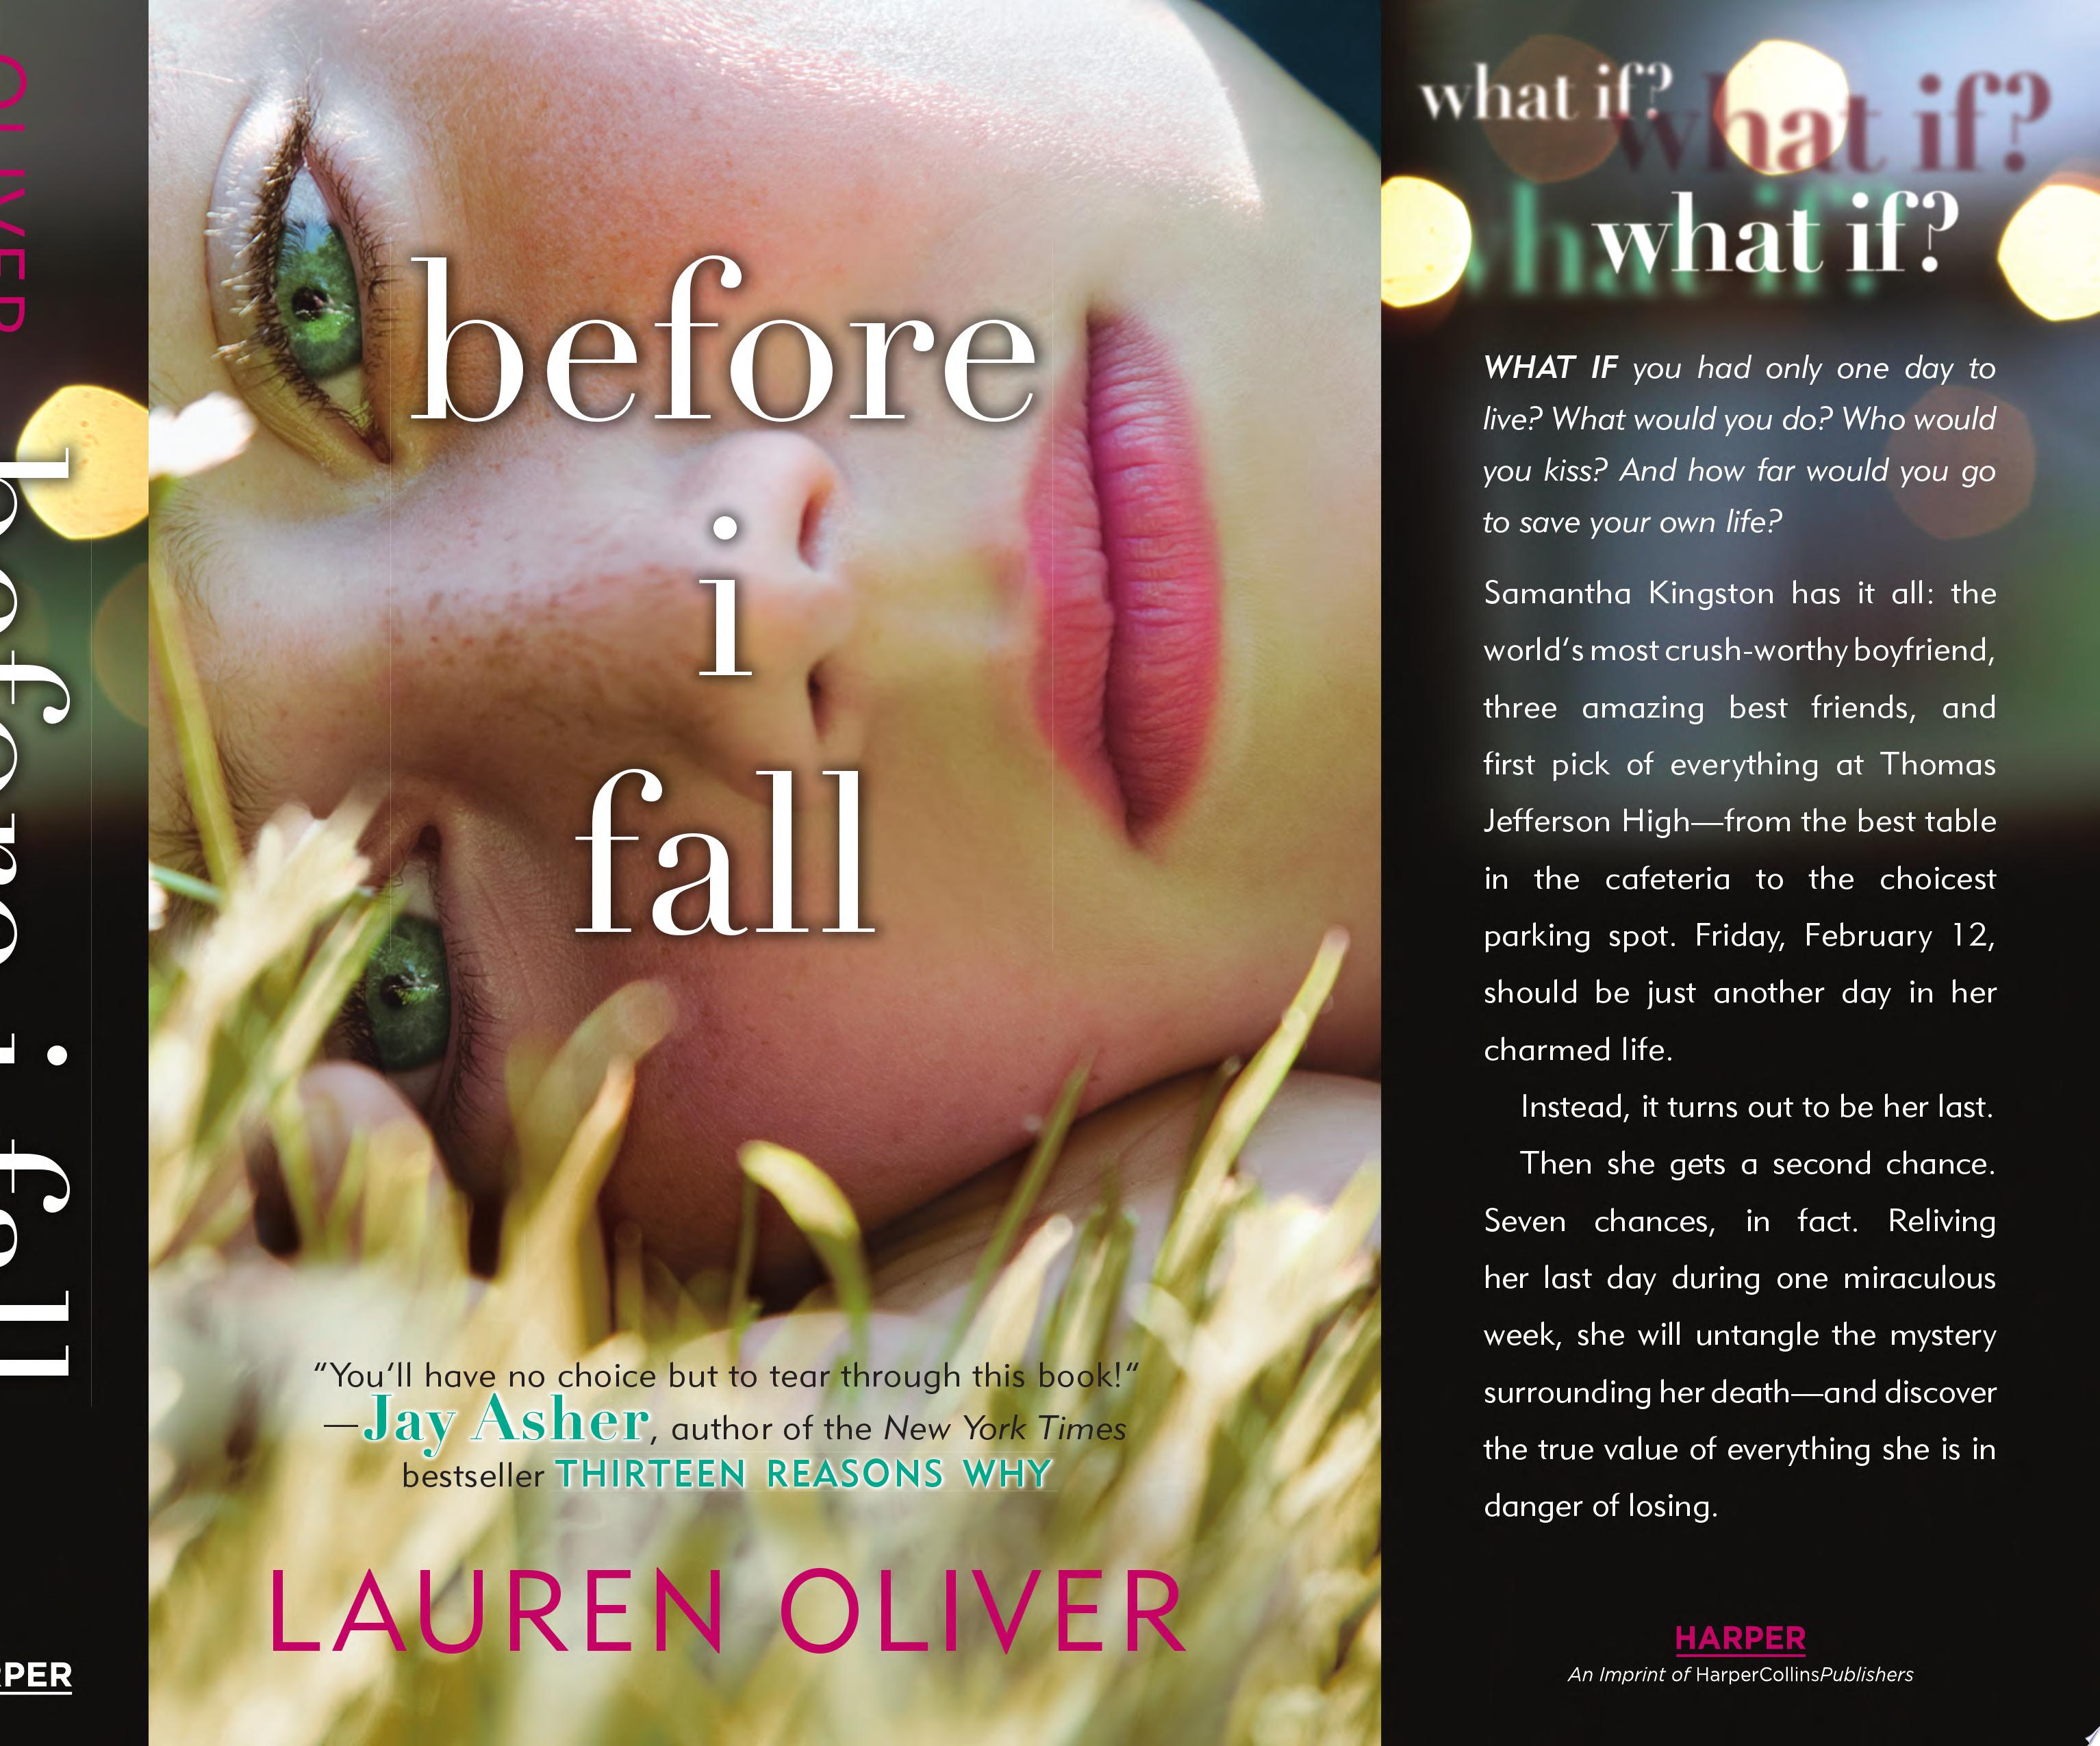 Image for "Before I Fall"